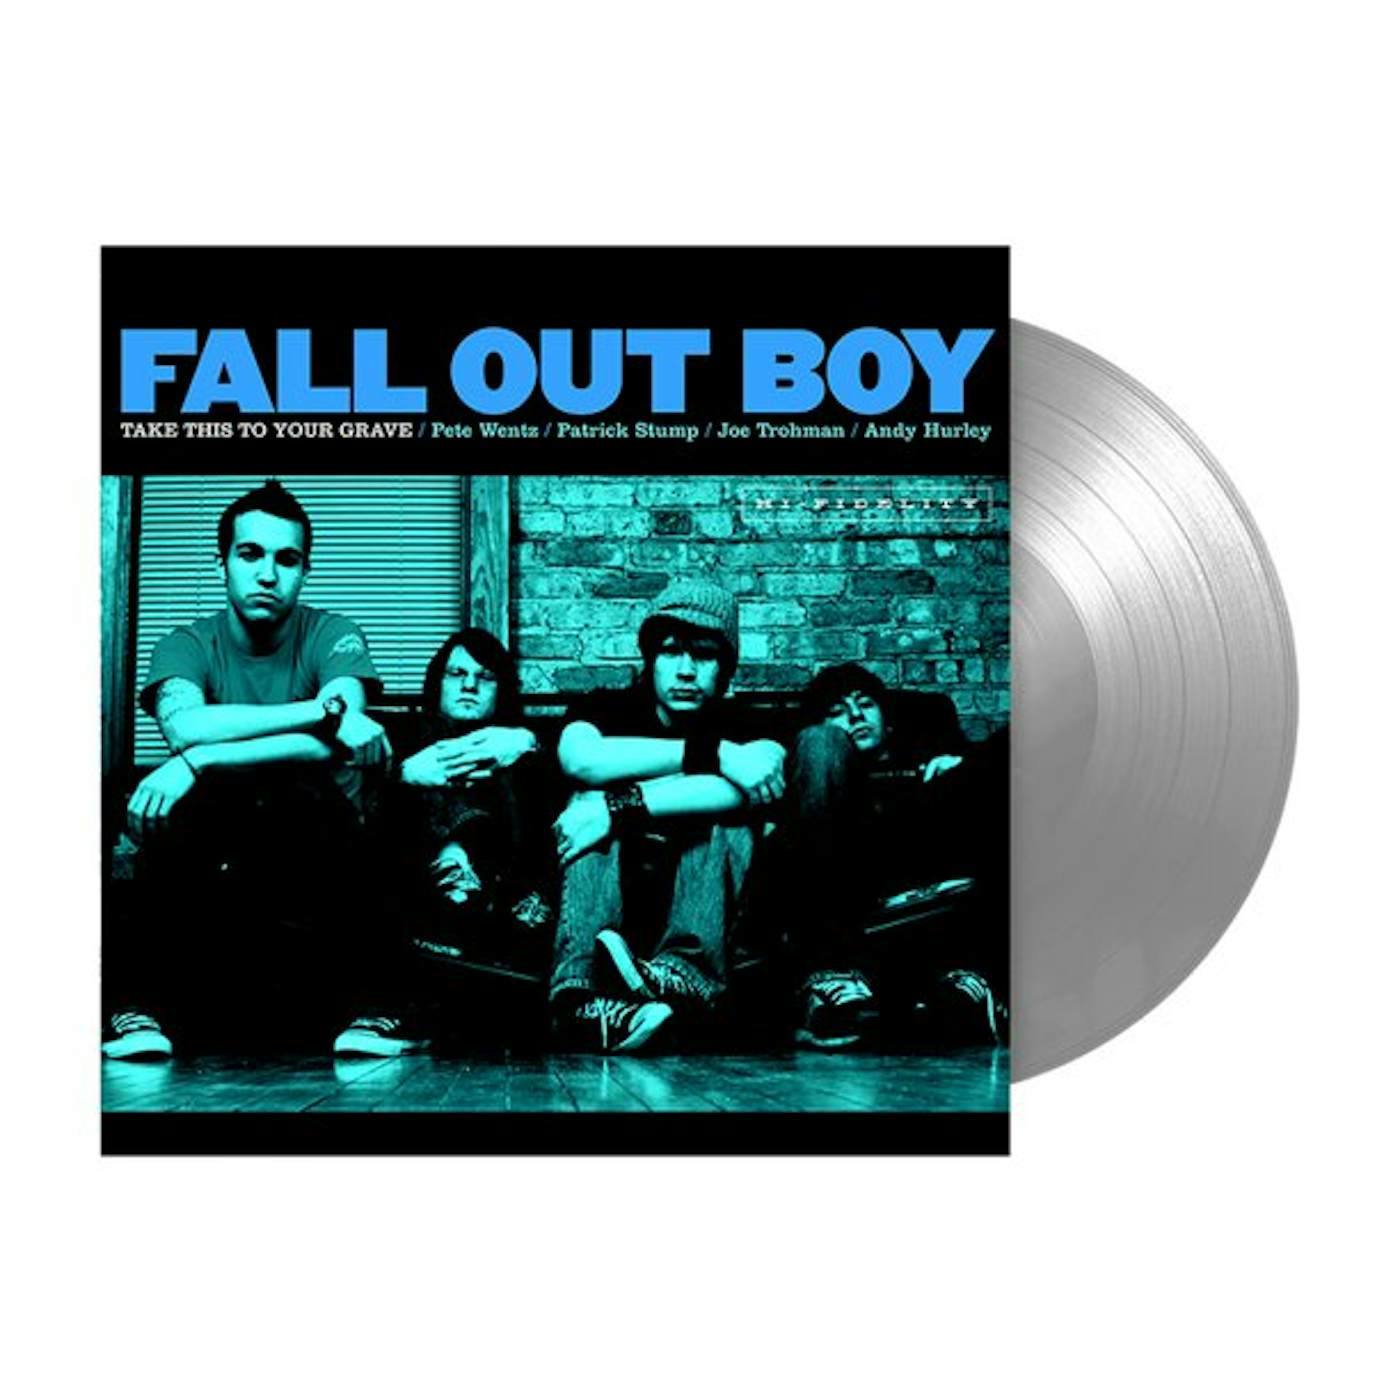 Fall Out Boy Take This To Your Grave (Fbr 25th Anniversary Edition/Silver) Vinyl Record